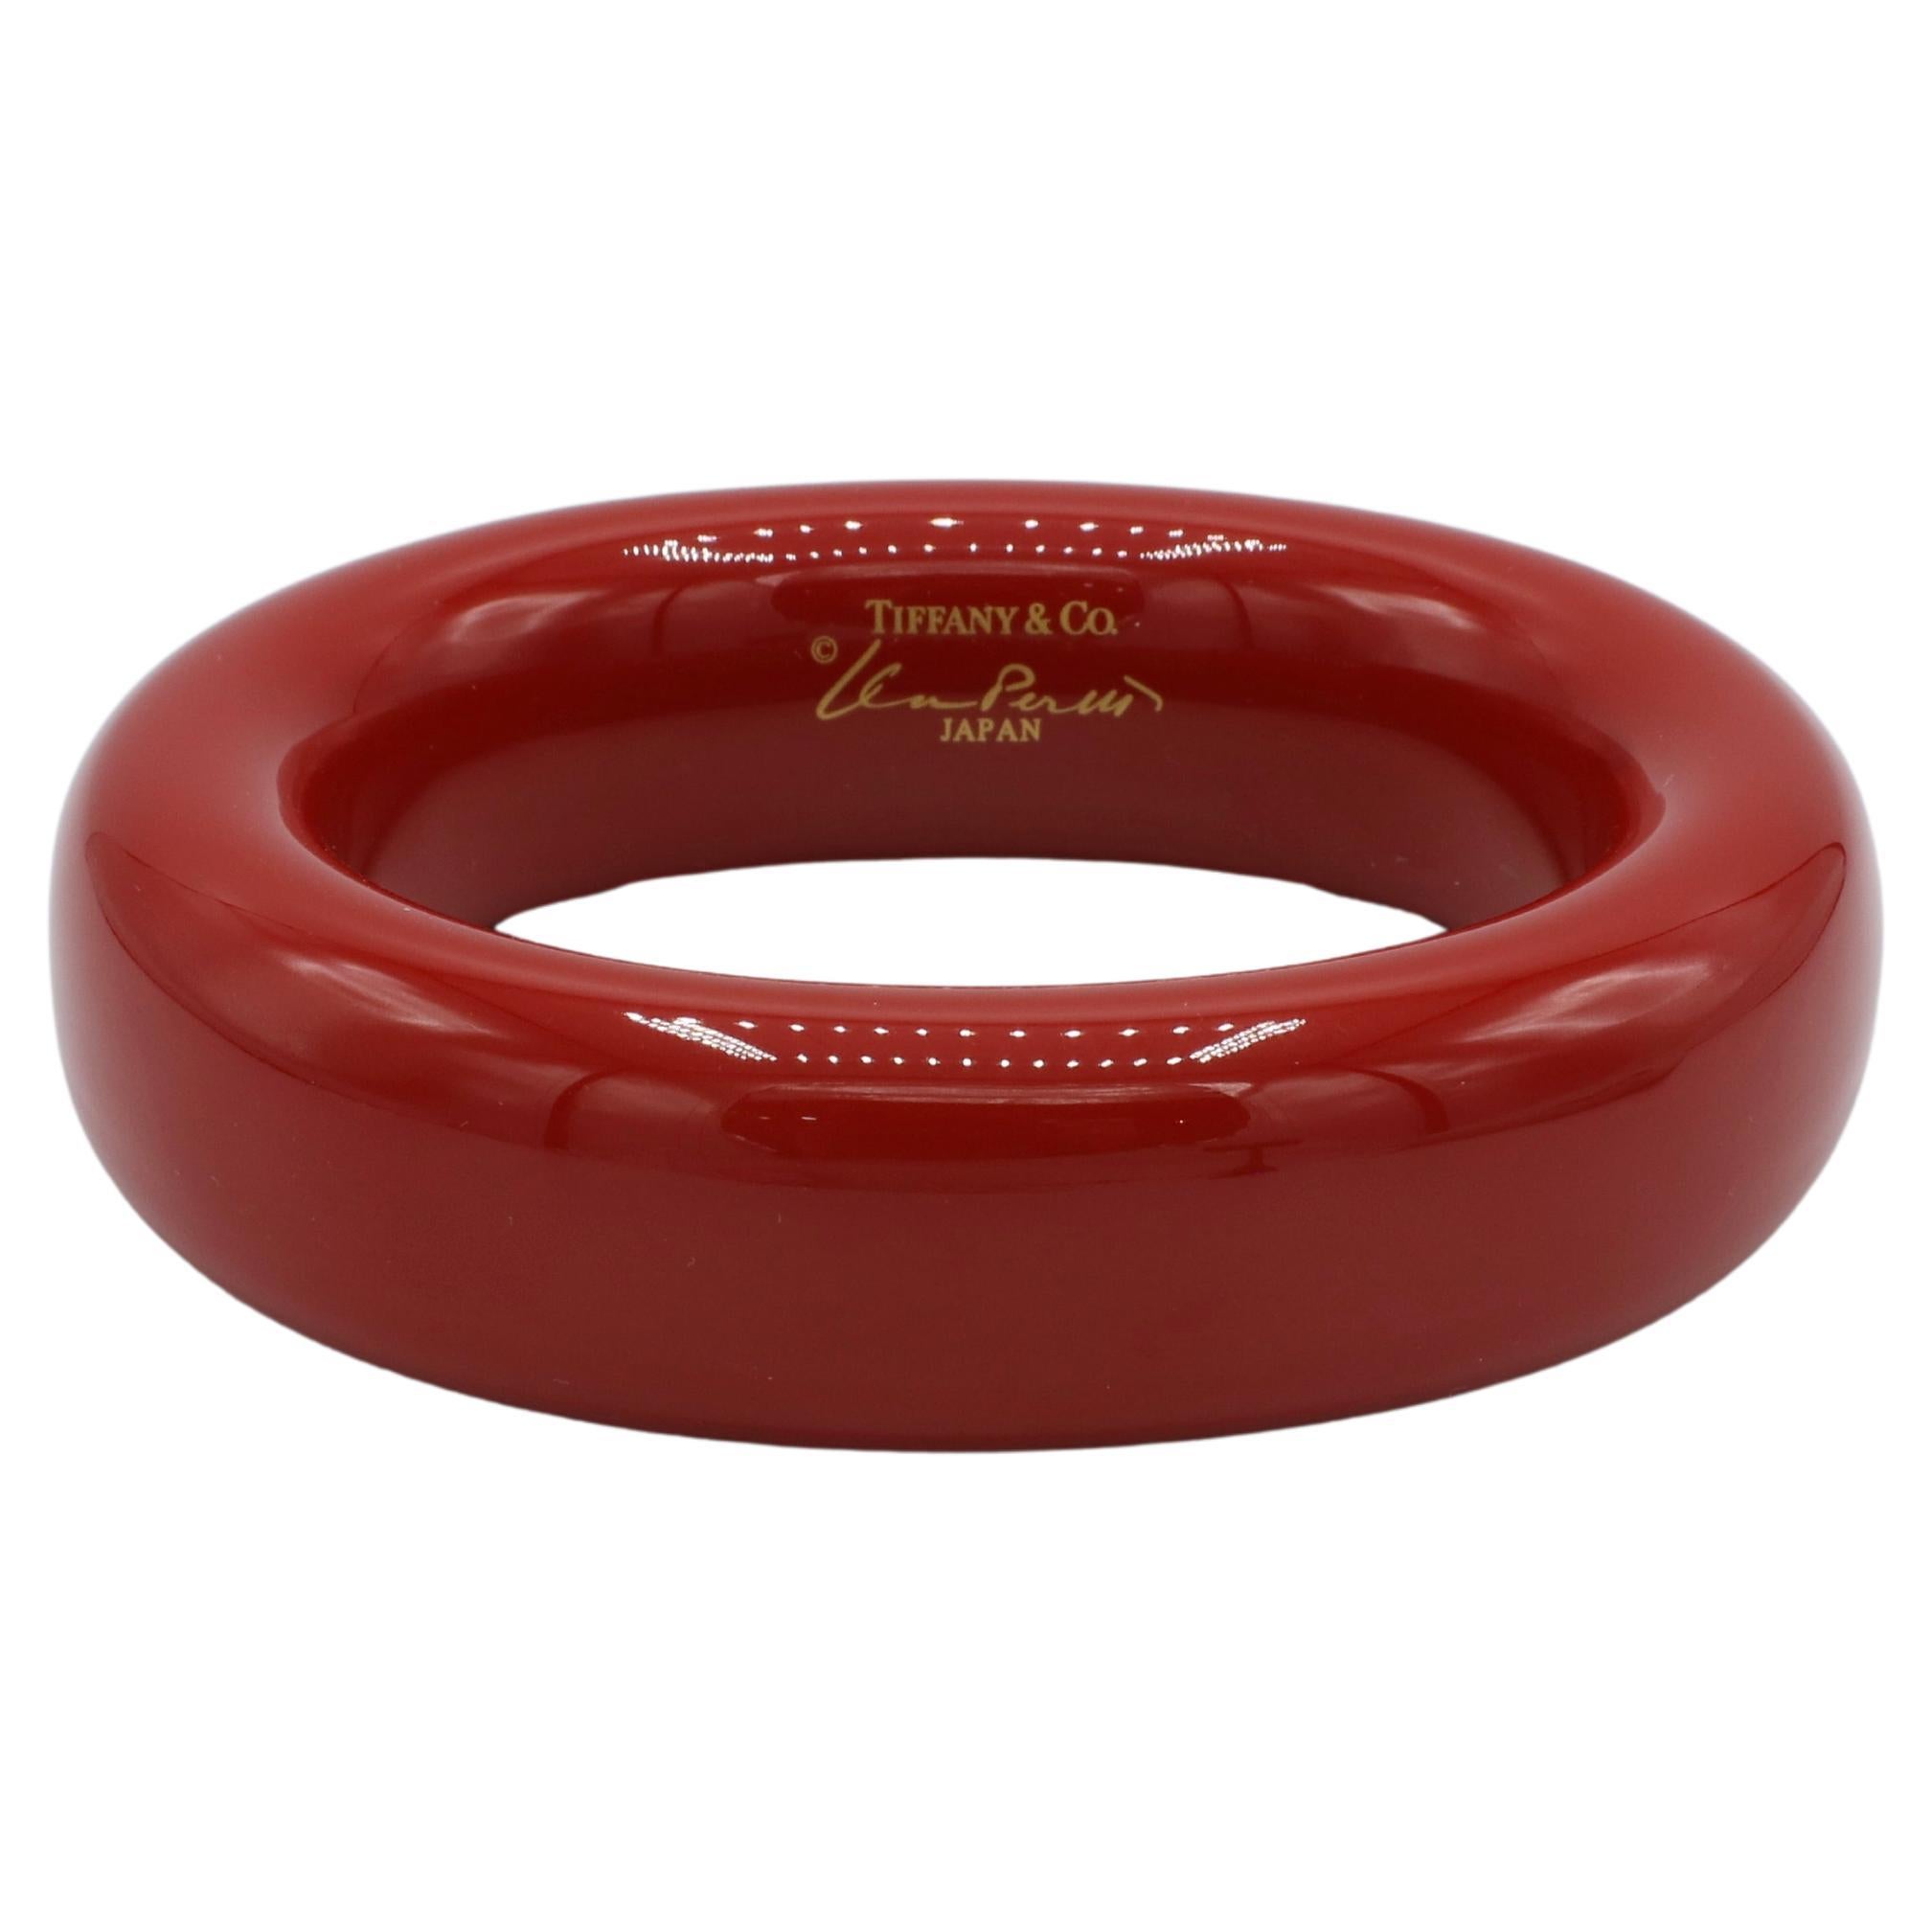 Tiffany & Co. Elsa Peretti Red Lacquer Bangle Bracelet
Material: Red lacquer over Japanese hardwood
Weight: 35 grams
Width: 23mm
Inner Circumference: 7.5 inches
Signed: Tiffany & Co. ©Elsa Peretti JAPAN
Retail: $725 USD